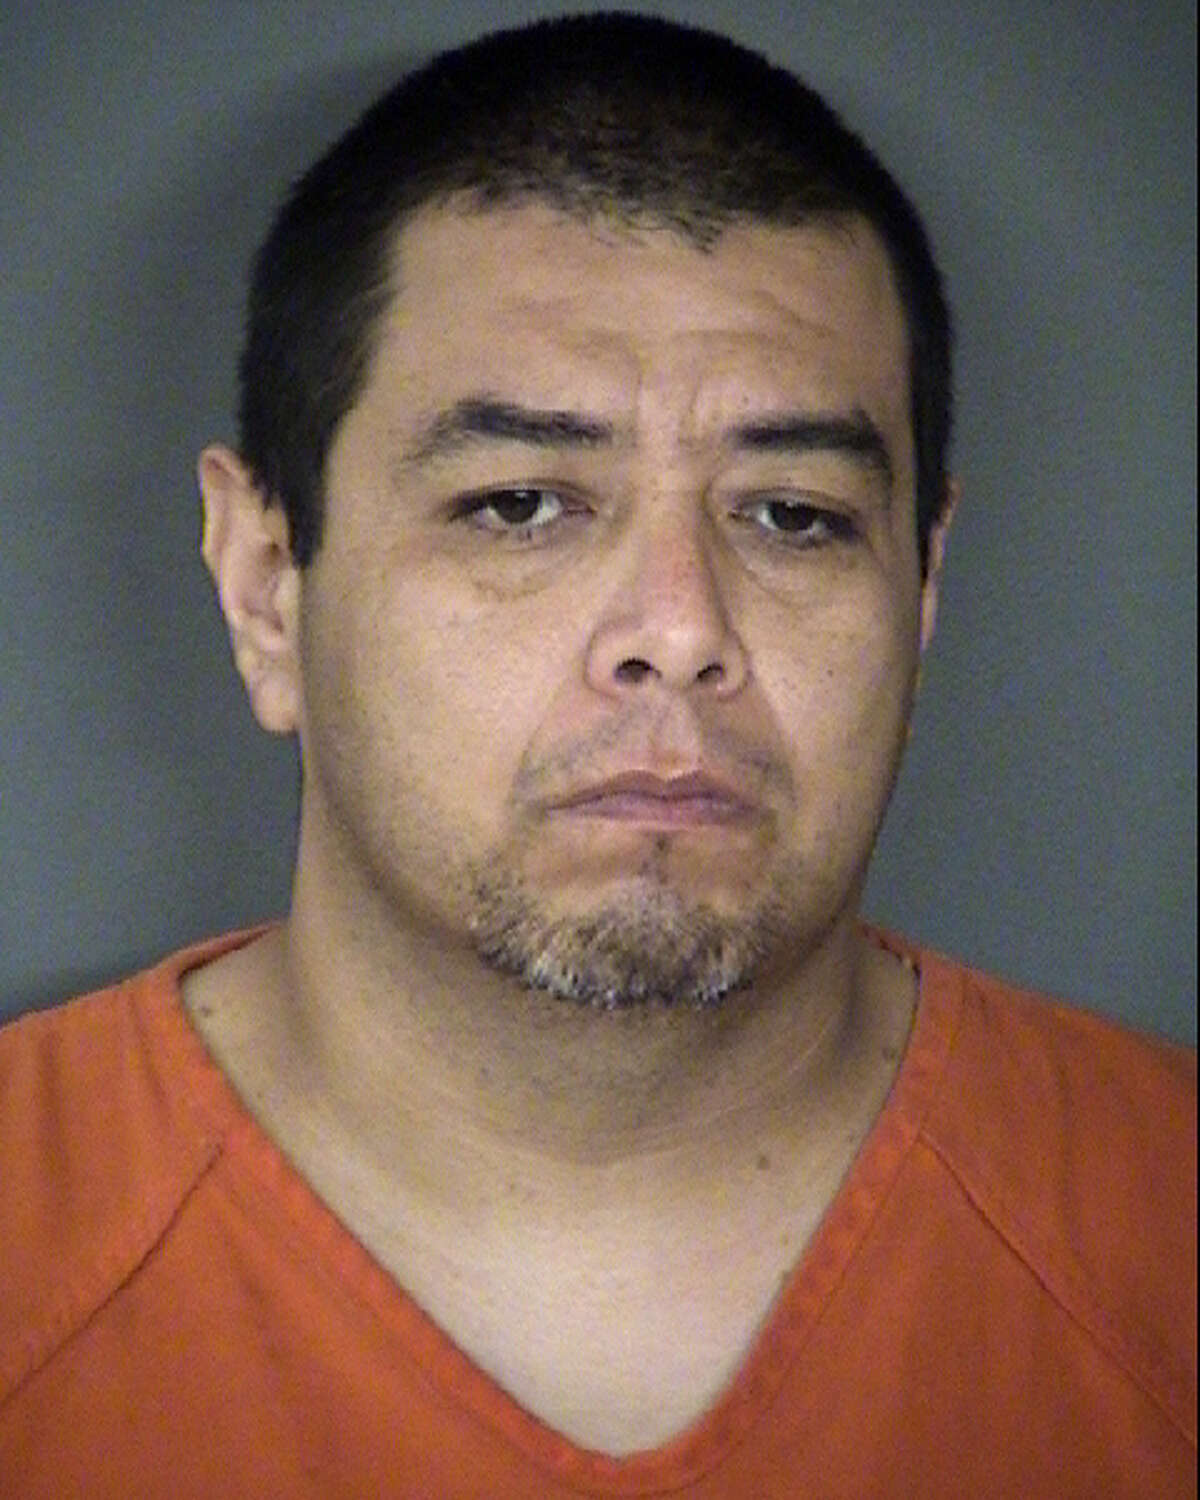 Carlos Richard Villarreal, 39, faces a first-degree felony charge of trafficking of a person under the age of 18 for prostitution, and a third-degree felony charge of possession of a controlled substance between 1 and 4 grams, according to online jail records.